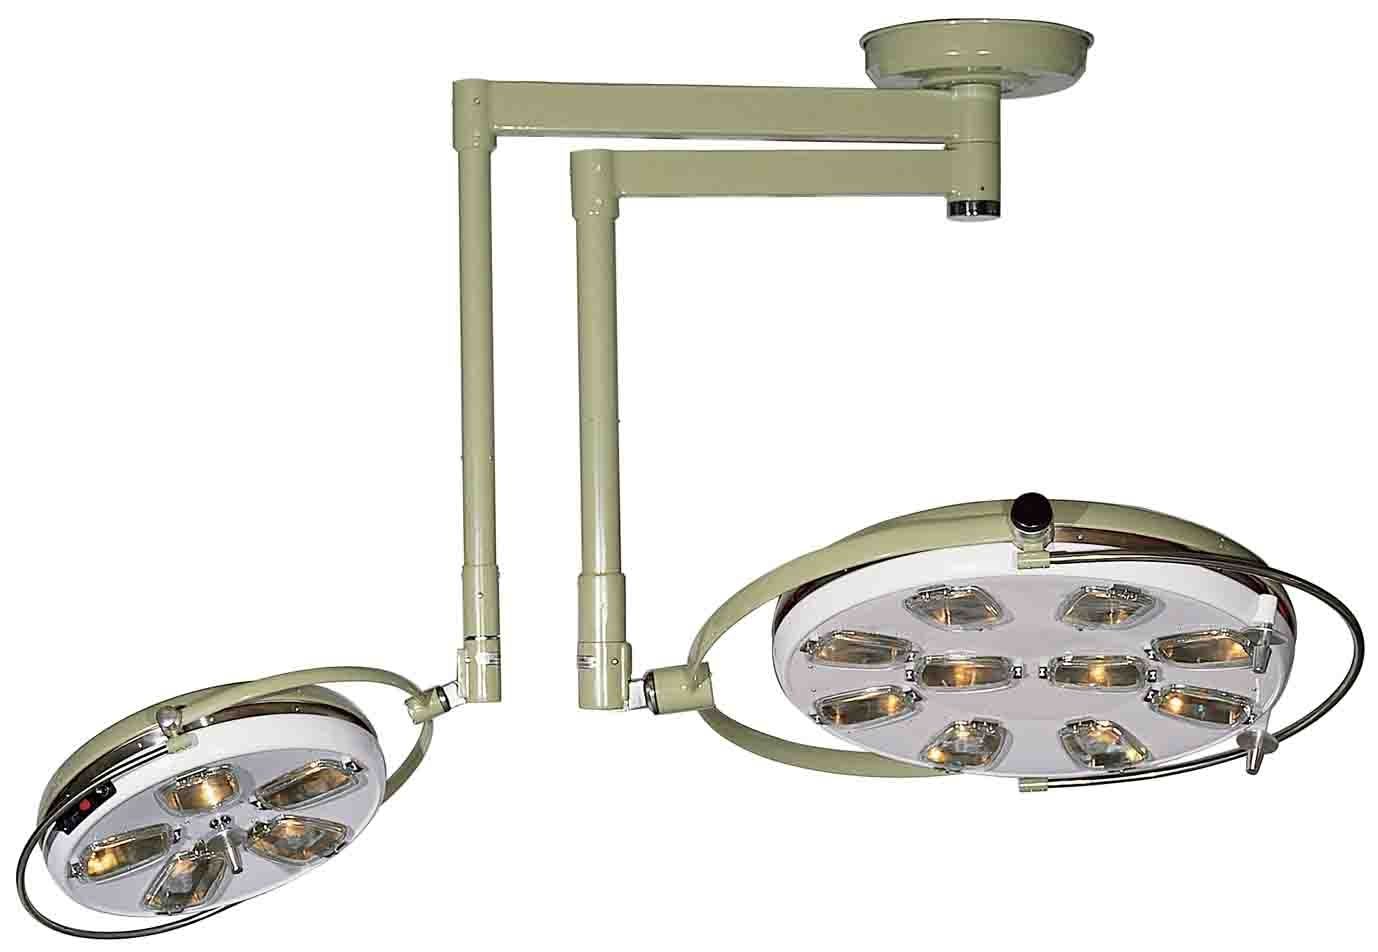 Halogen surgical light / ceiling-mounted / 2-arm OLH01-105X St. Francis Medical Equipment